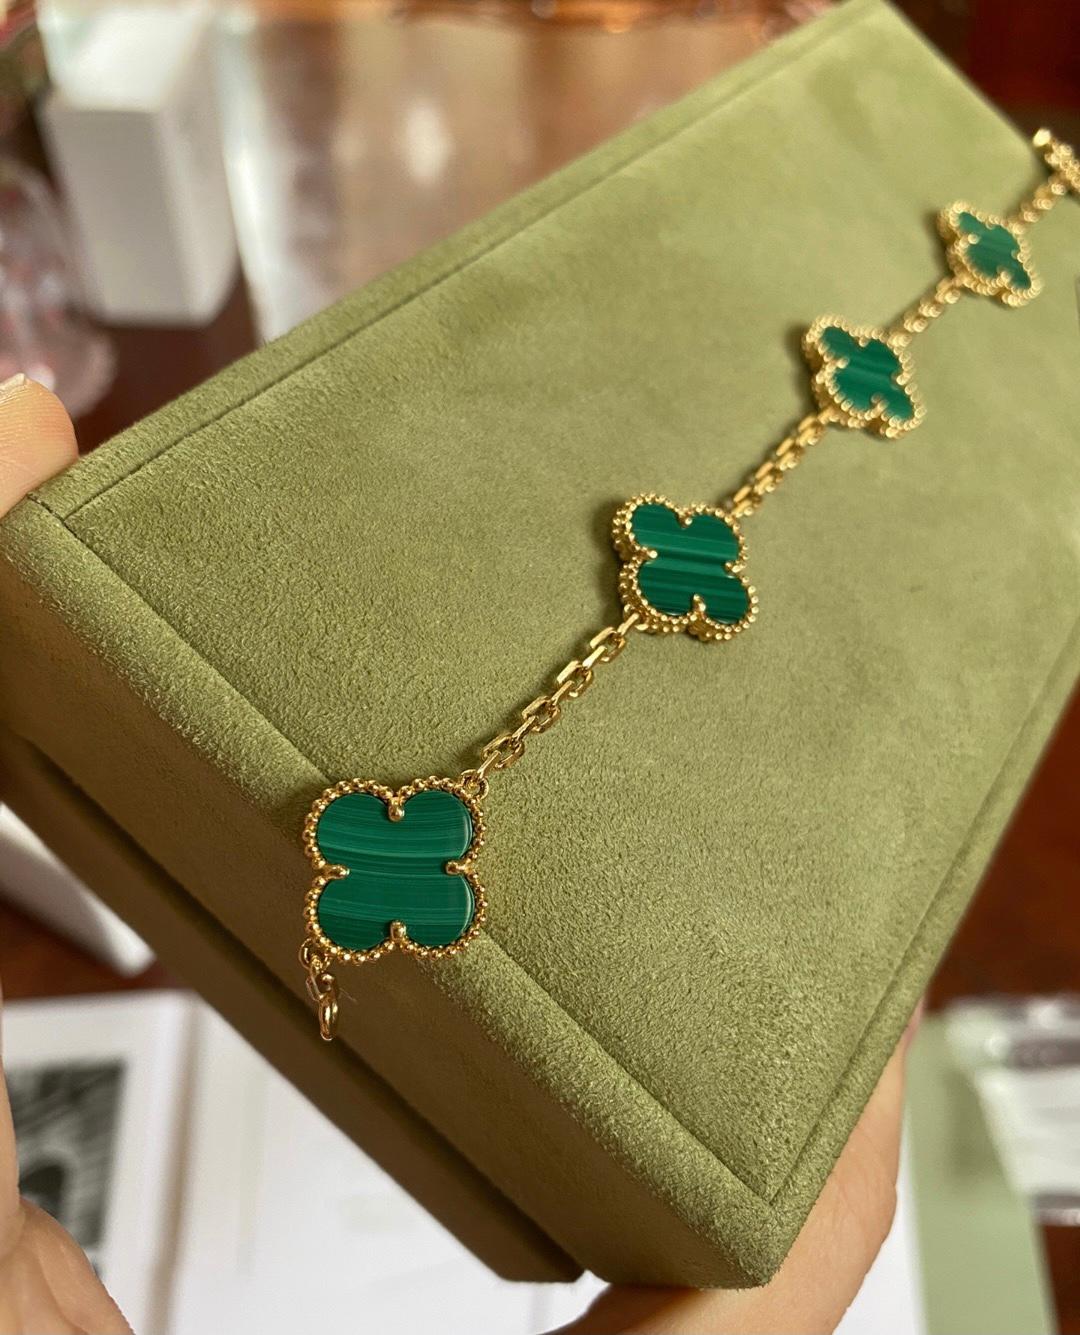 18k Yellow Gold 5-Motif Malachite Vintage Alhambra Bracelet by Van Cleef & Arpels. 
The pendant comes with a VCA original box. 
Retail Price: £3850

Every piece we sell is 100% authentic guaranteed, in very good condition. Every designer piece is